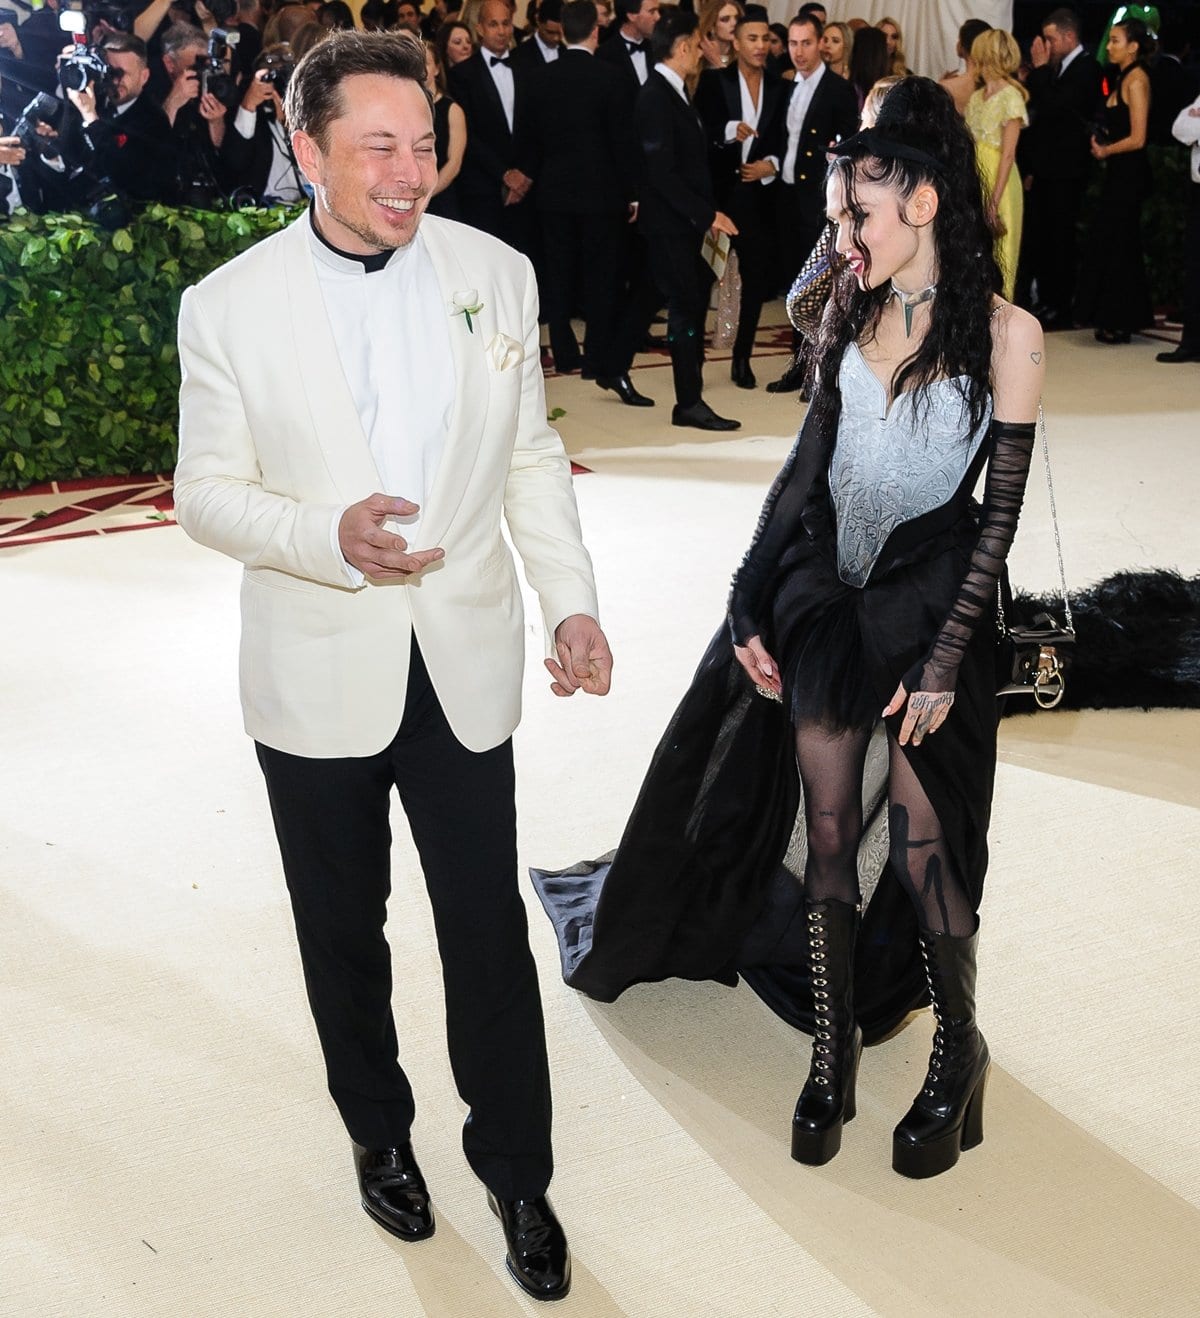 Elon Musk and Grimes wearing a Tesla choker made their red carpet debut together as a couple at the 2018 Metropolitan Museum of Art Costume Institute Benefit Gala